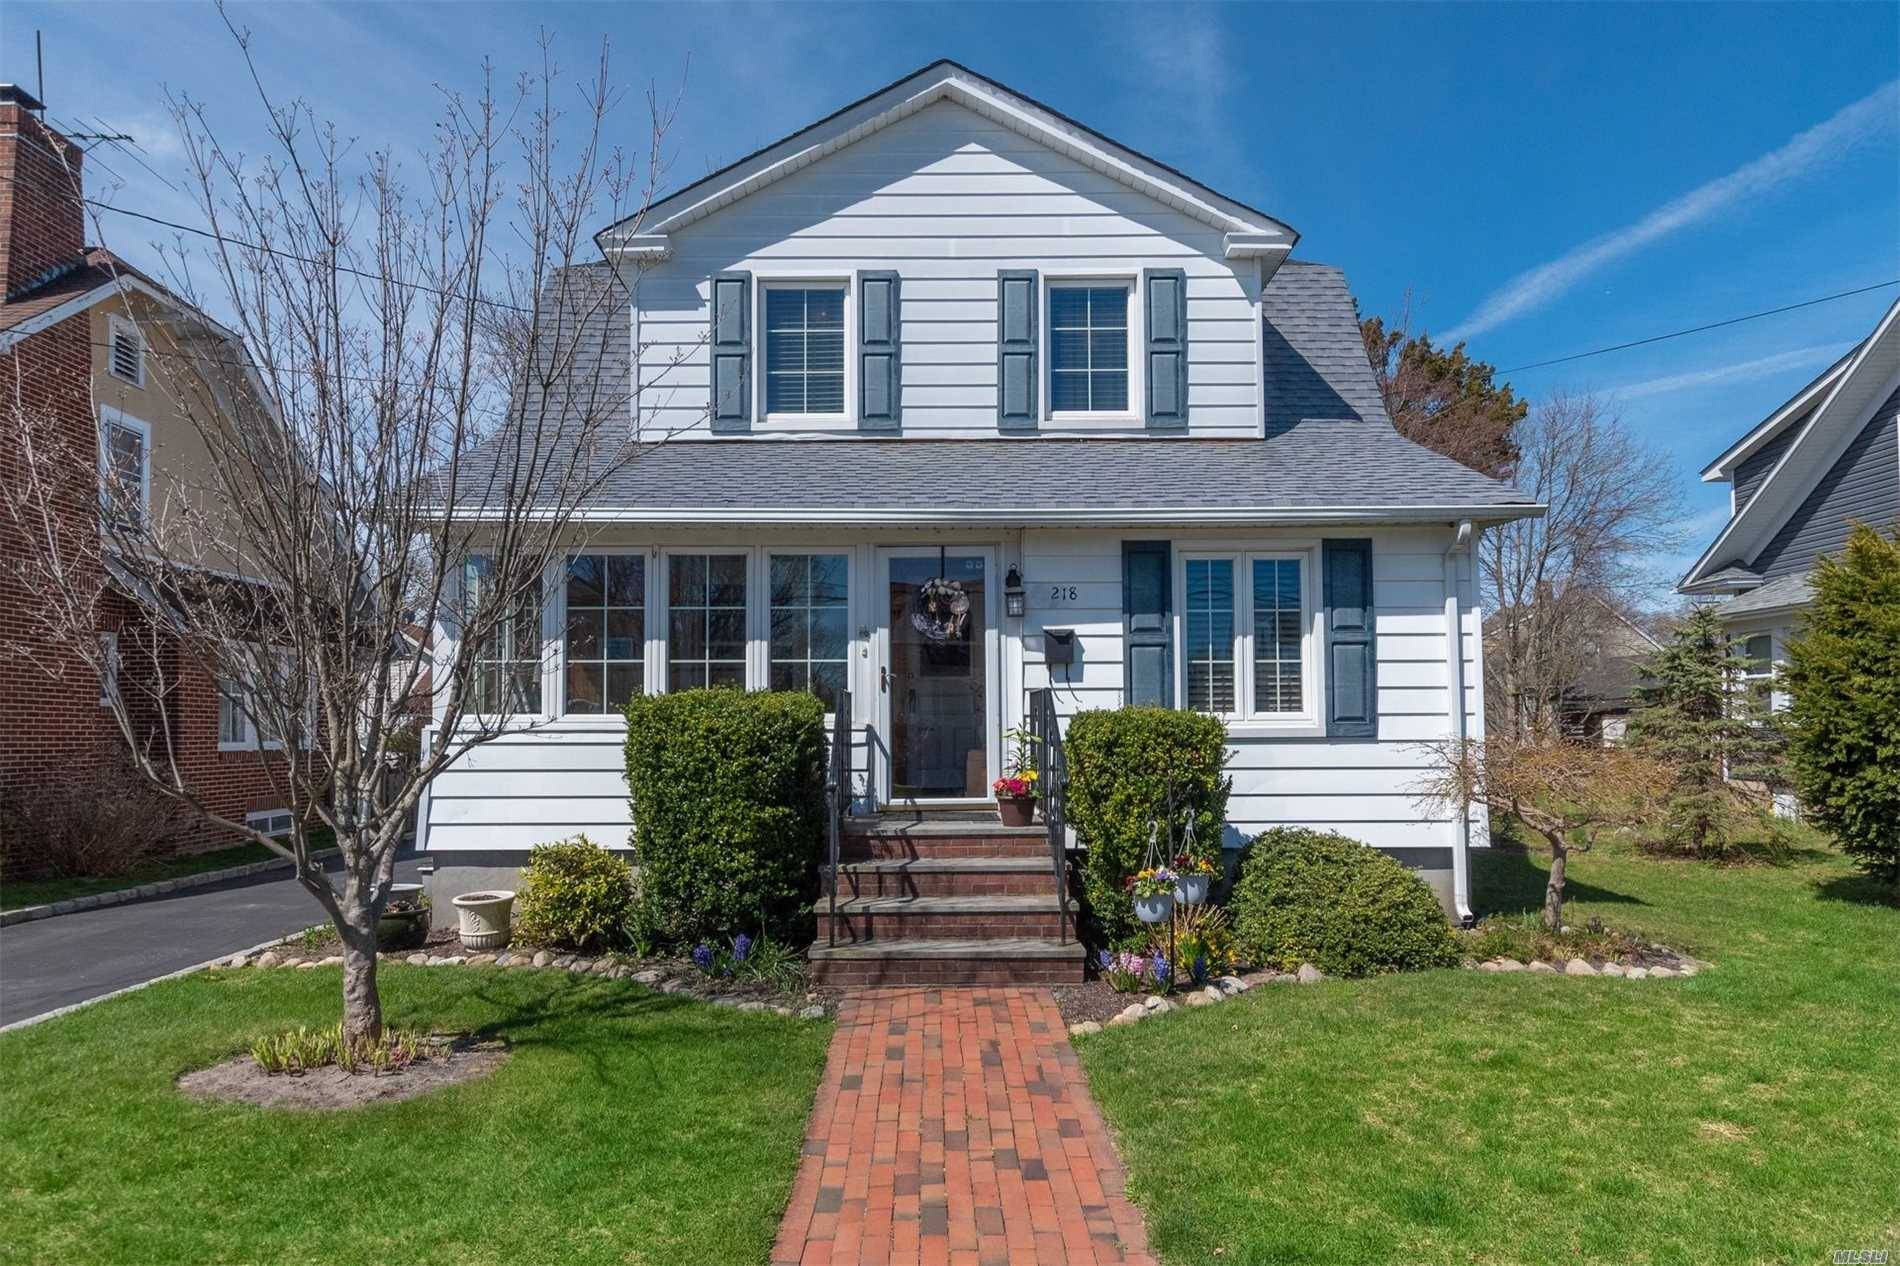 Pride of Ownership can be found in this Diamond Condition Dutch Colonial Home In The Heart Of Patchogue Village.